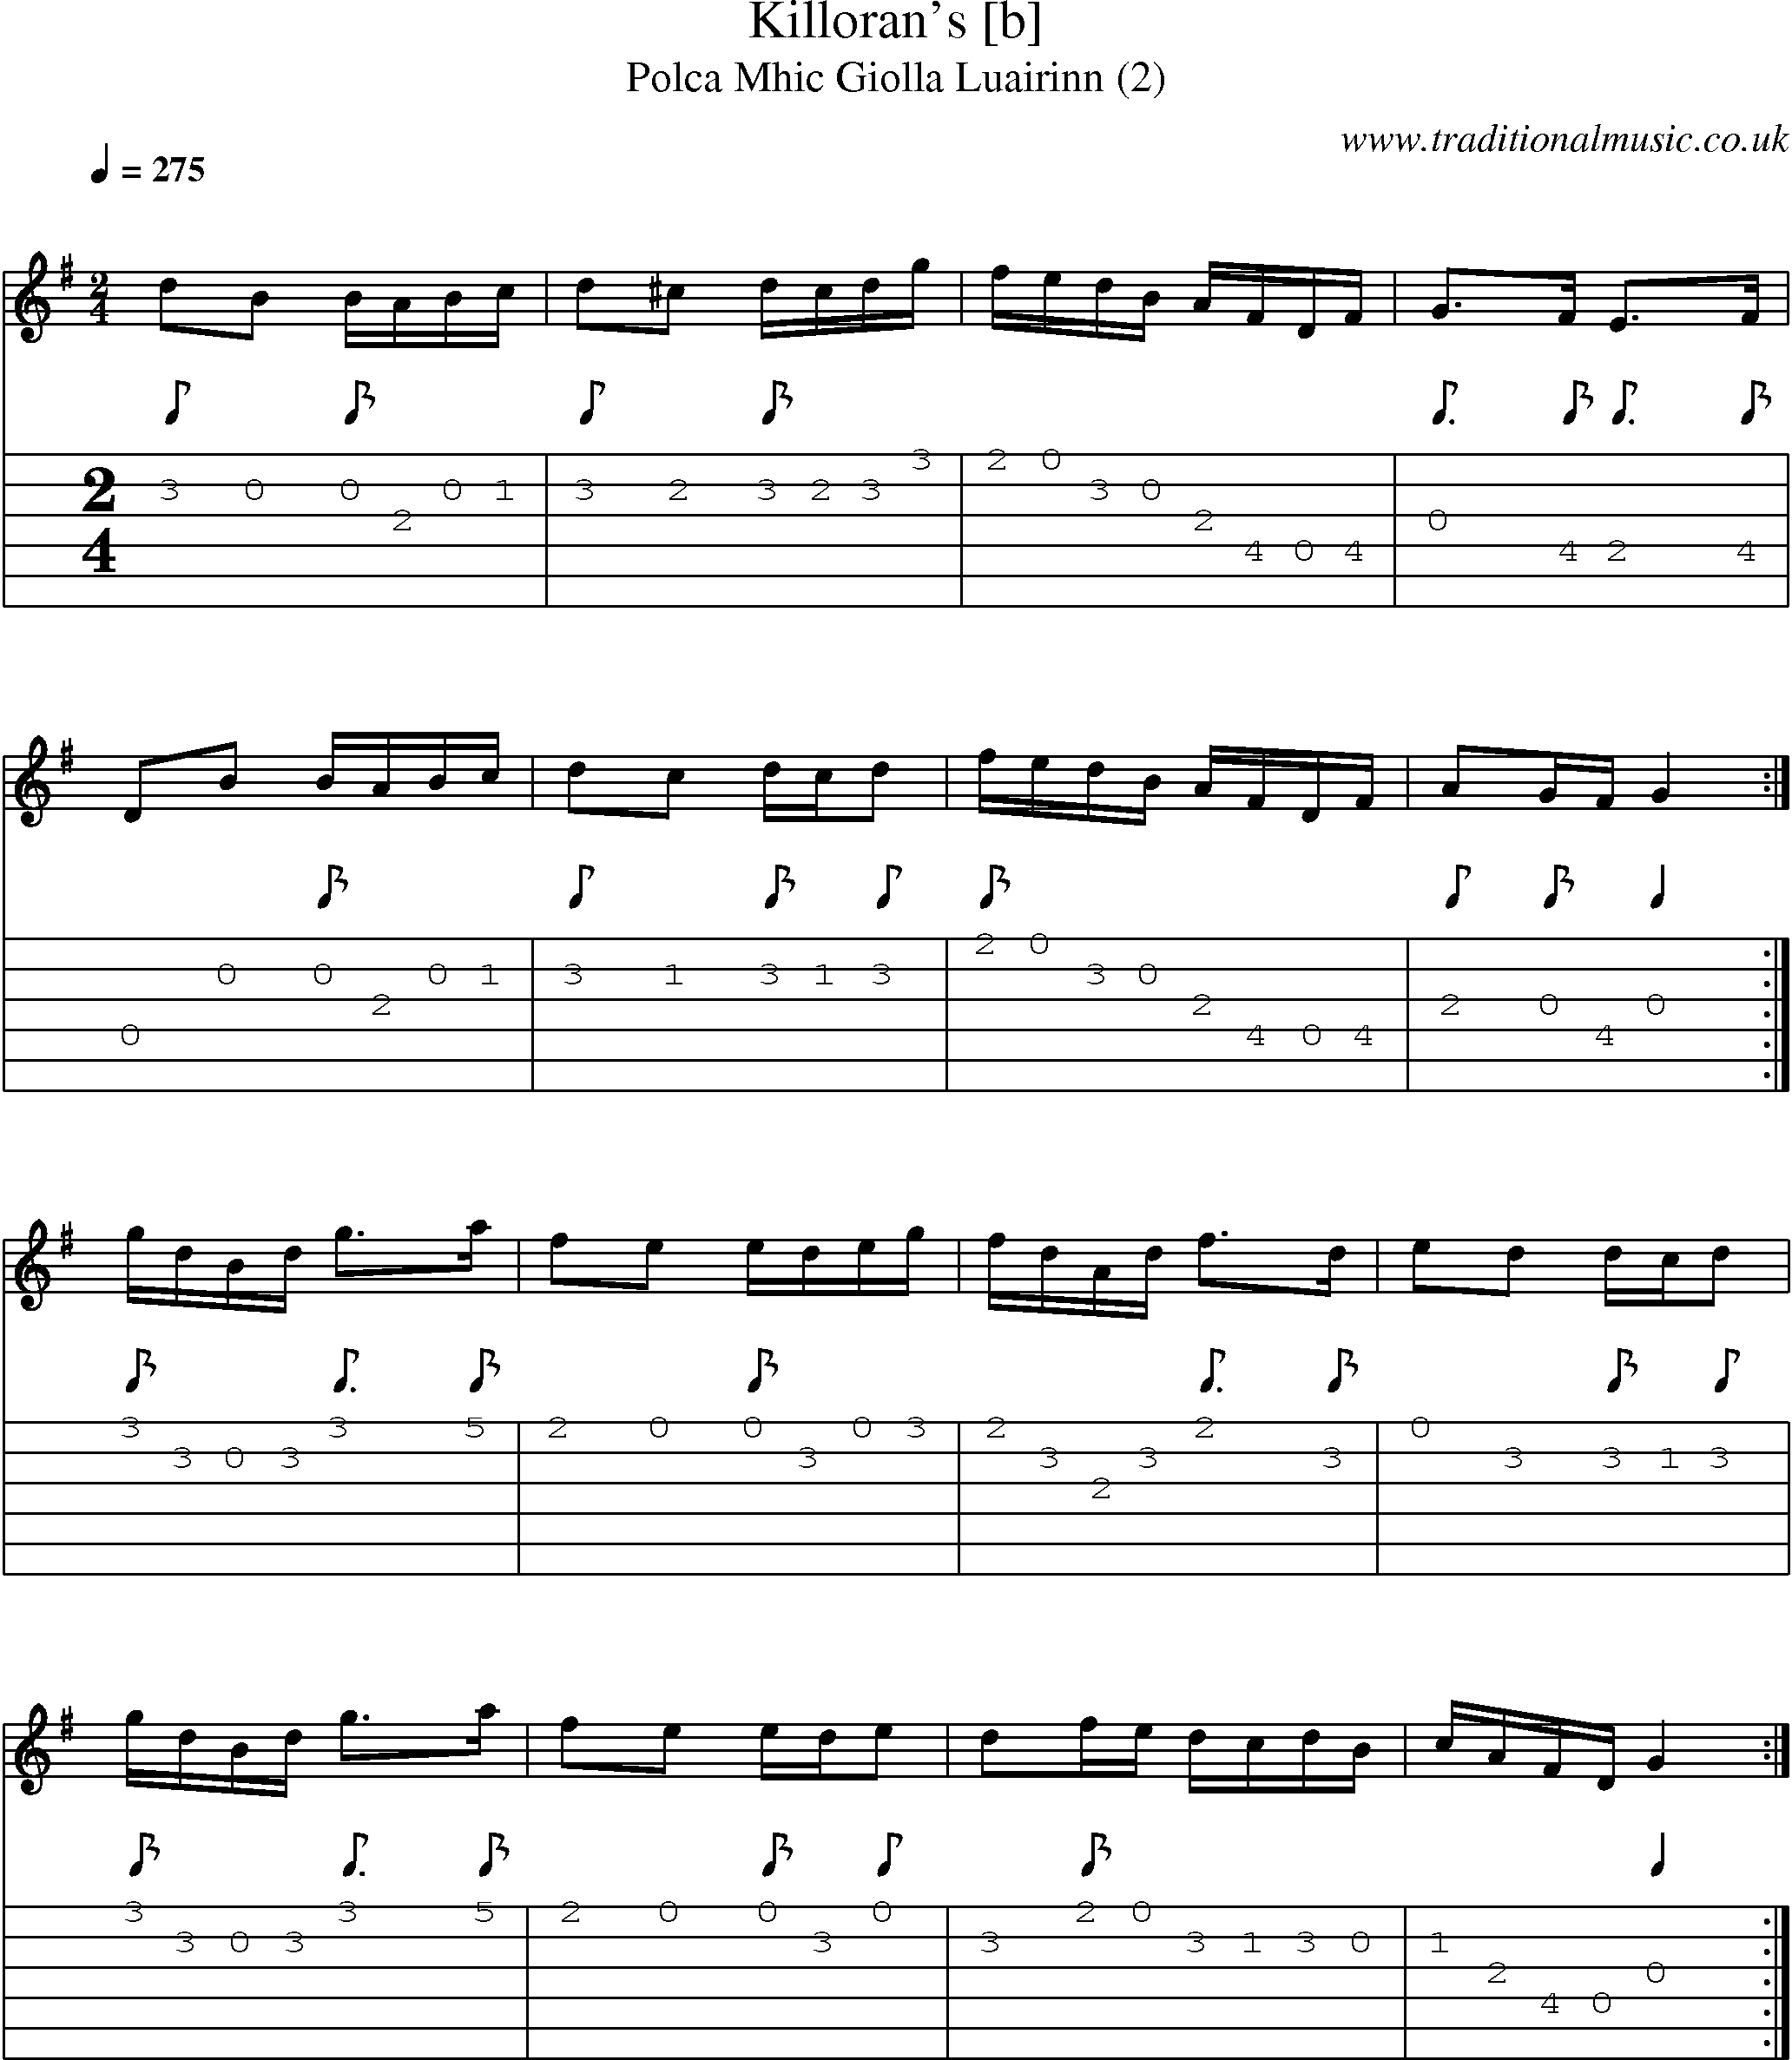 Music Score and Guitar Tabs for Killorans [b]